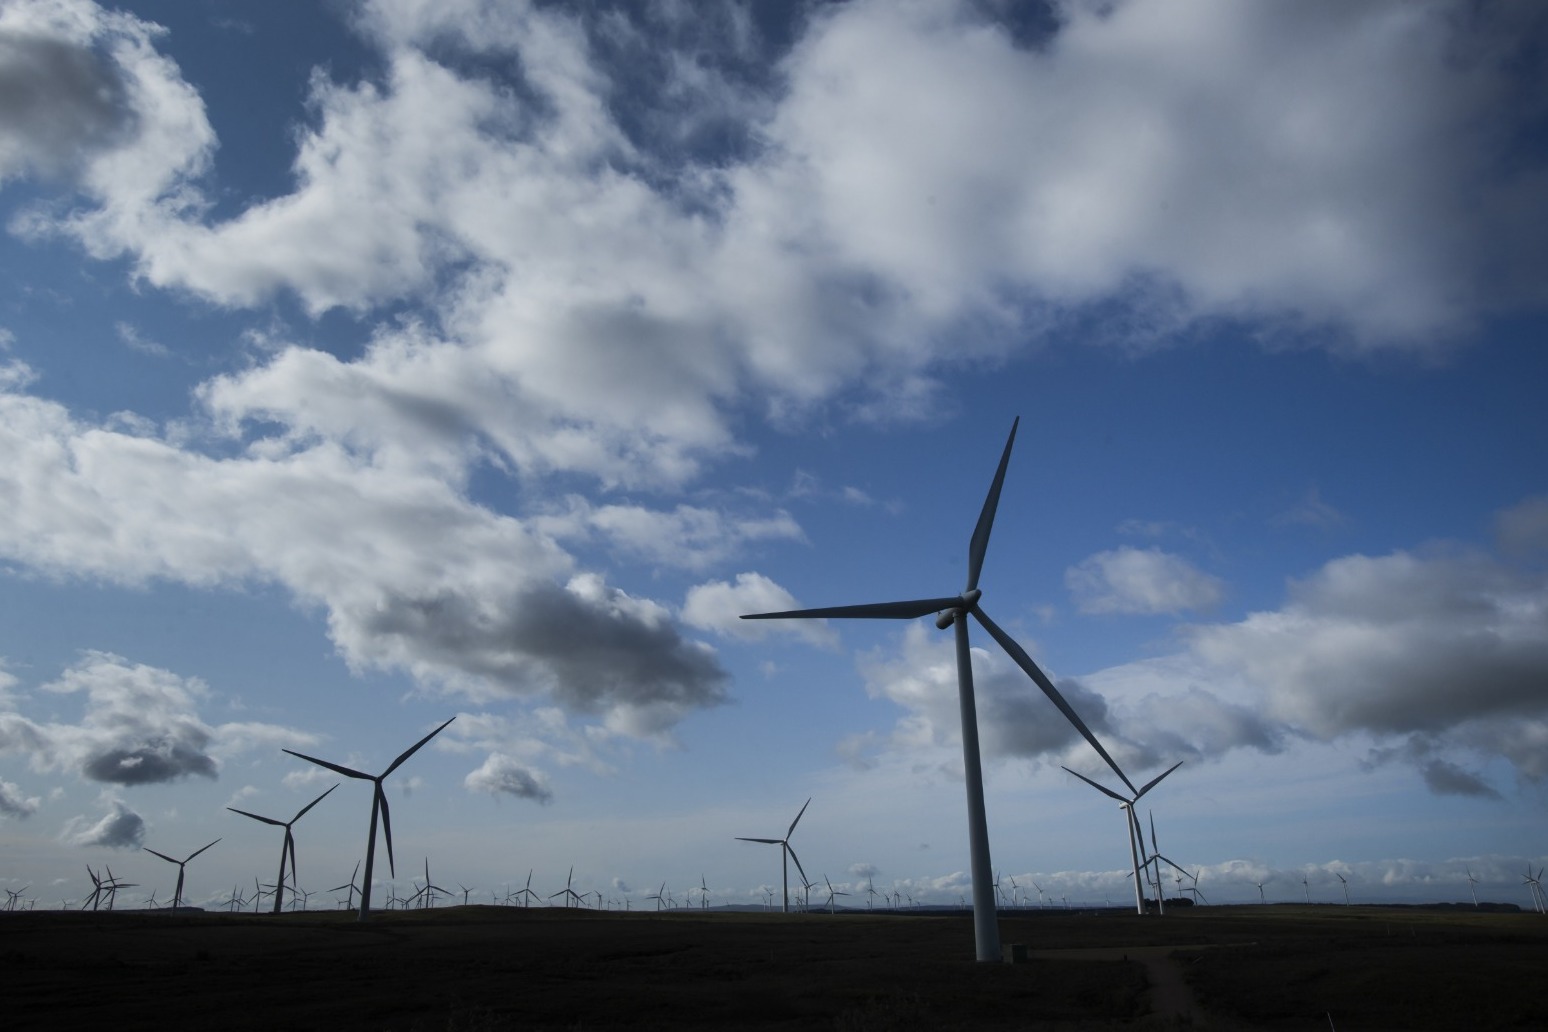 Public backs wind and solar farms to reduce energy bills, poll suggests 